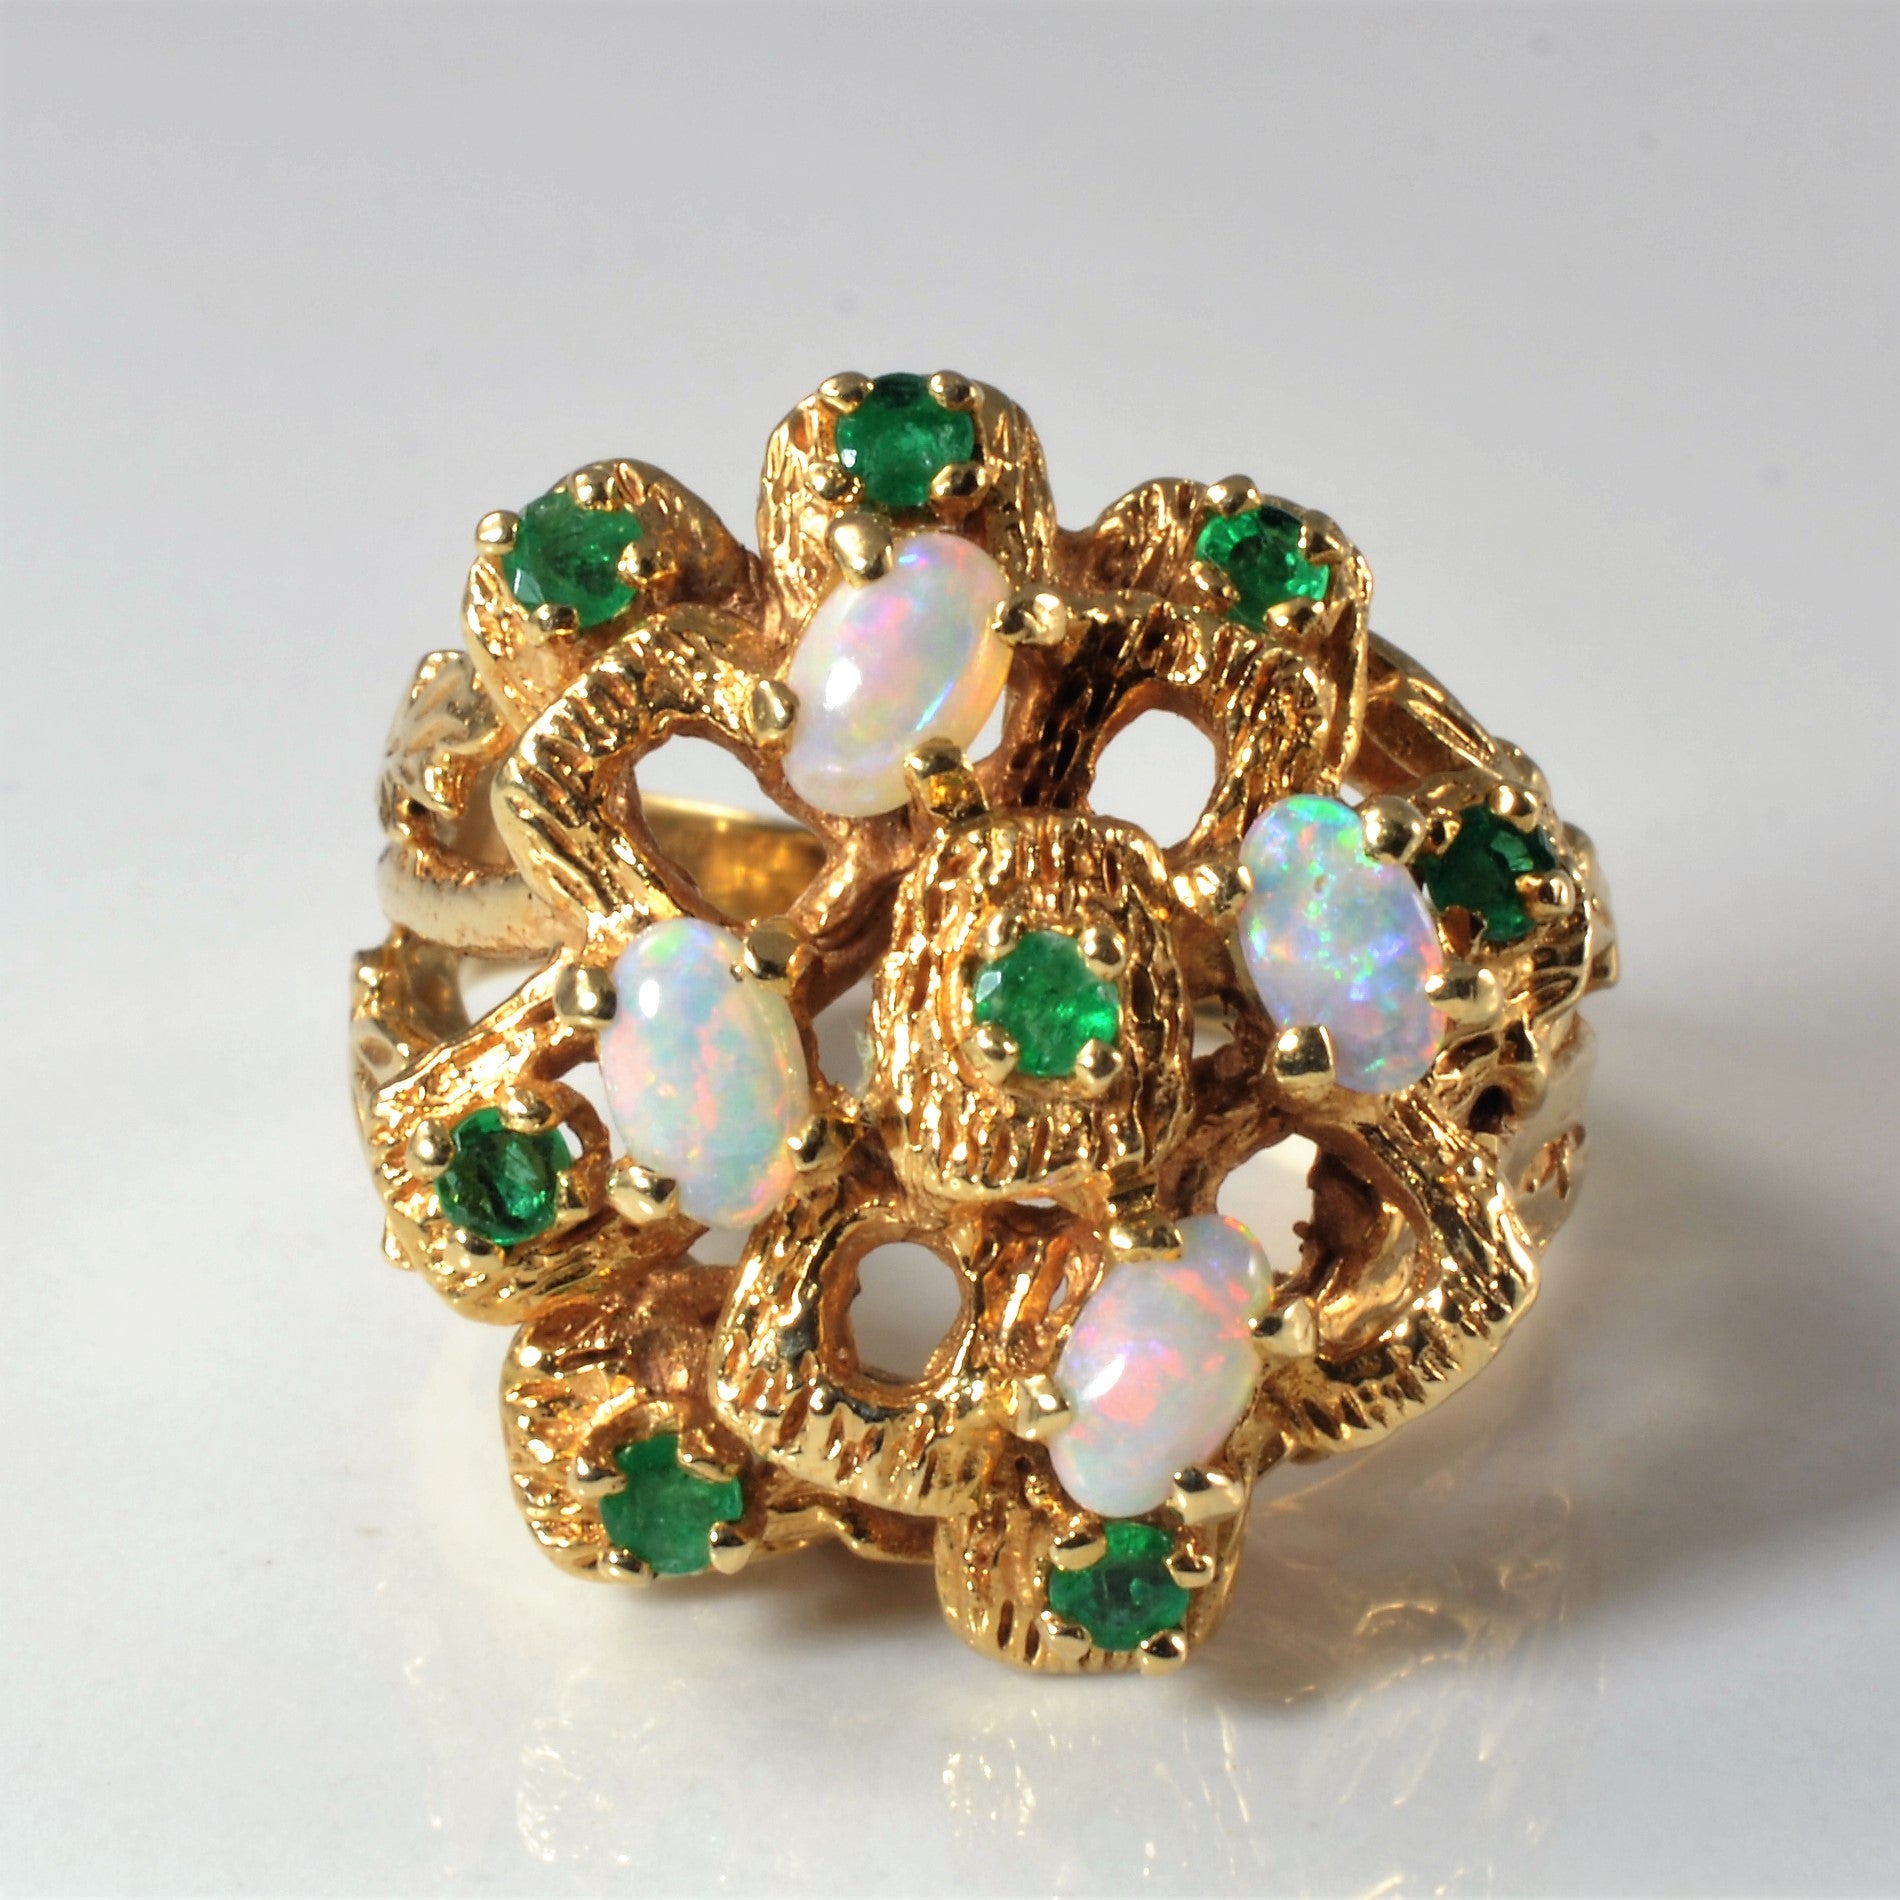 Emerald & Opal Cocktail Ring | 0.25ctw, 0.60ctw | SZ 7.75 |